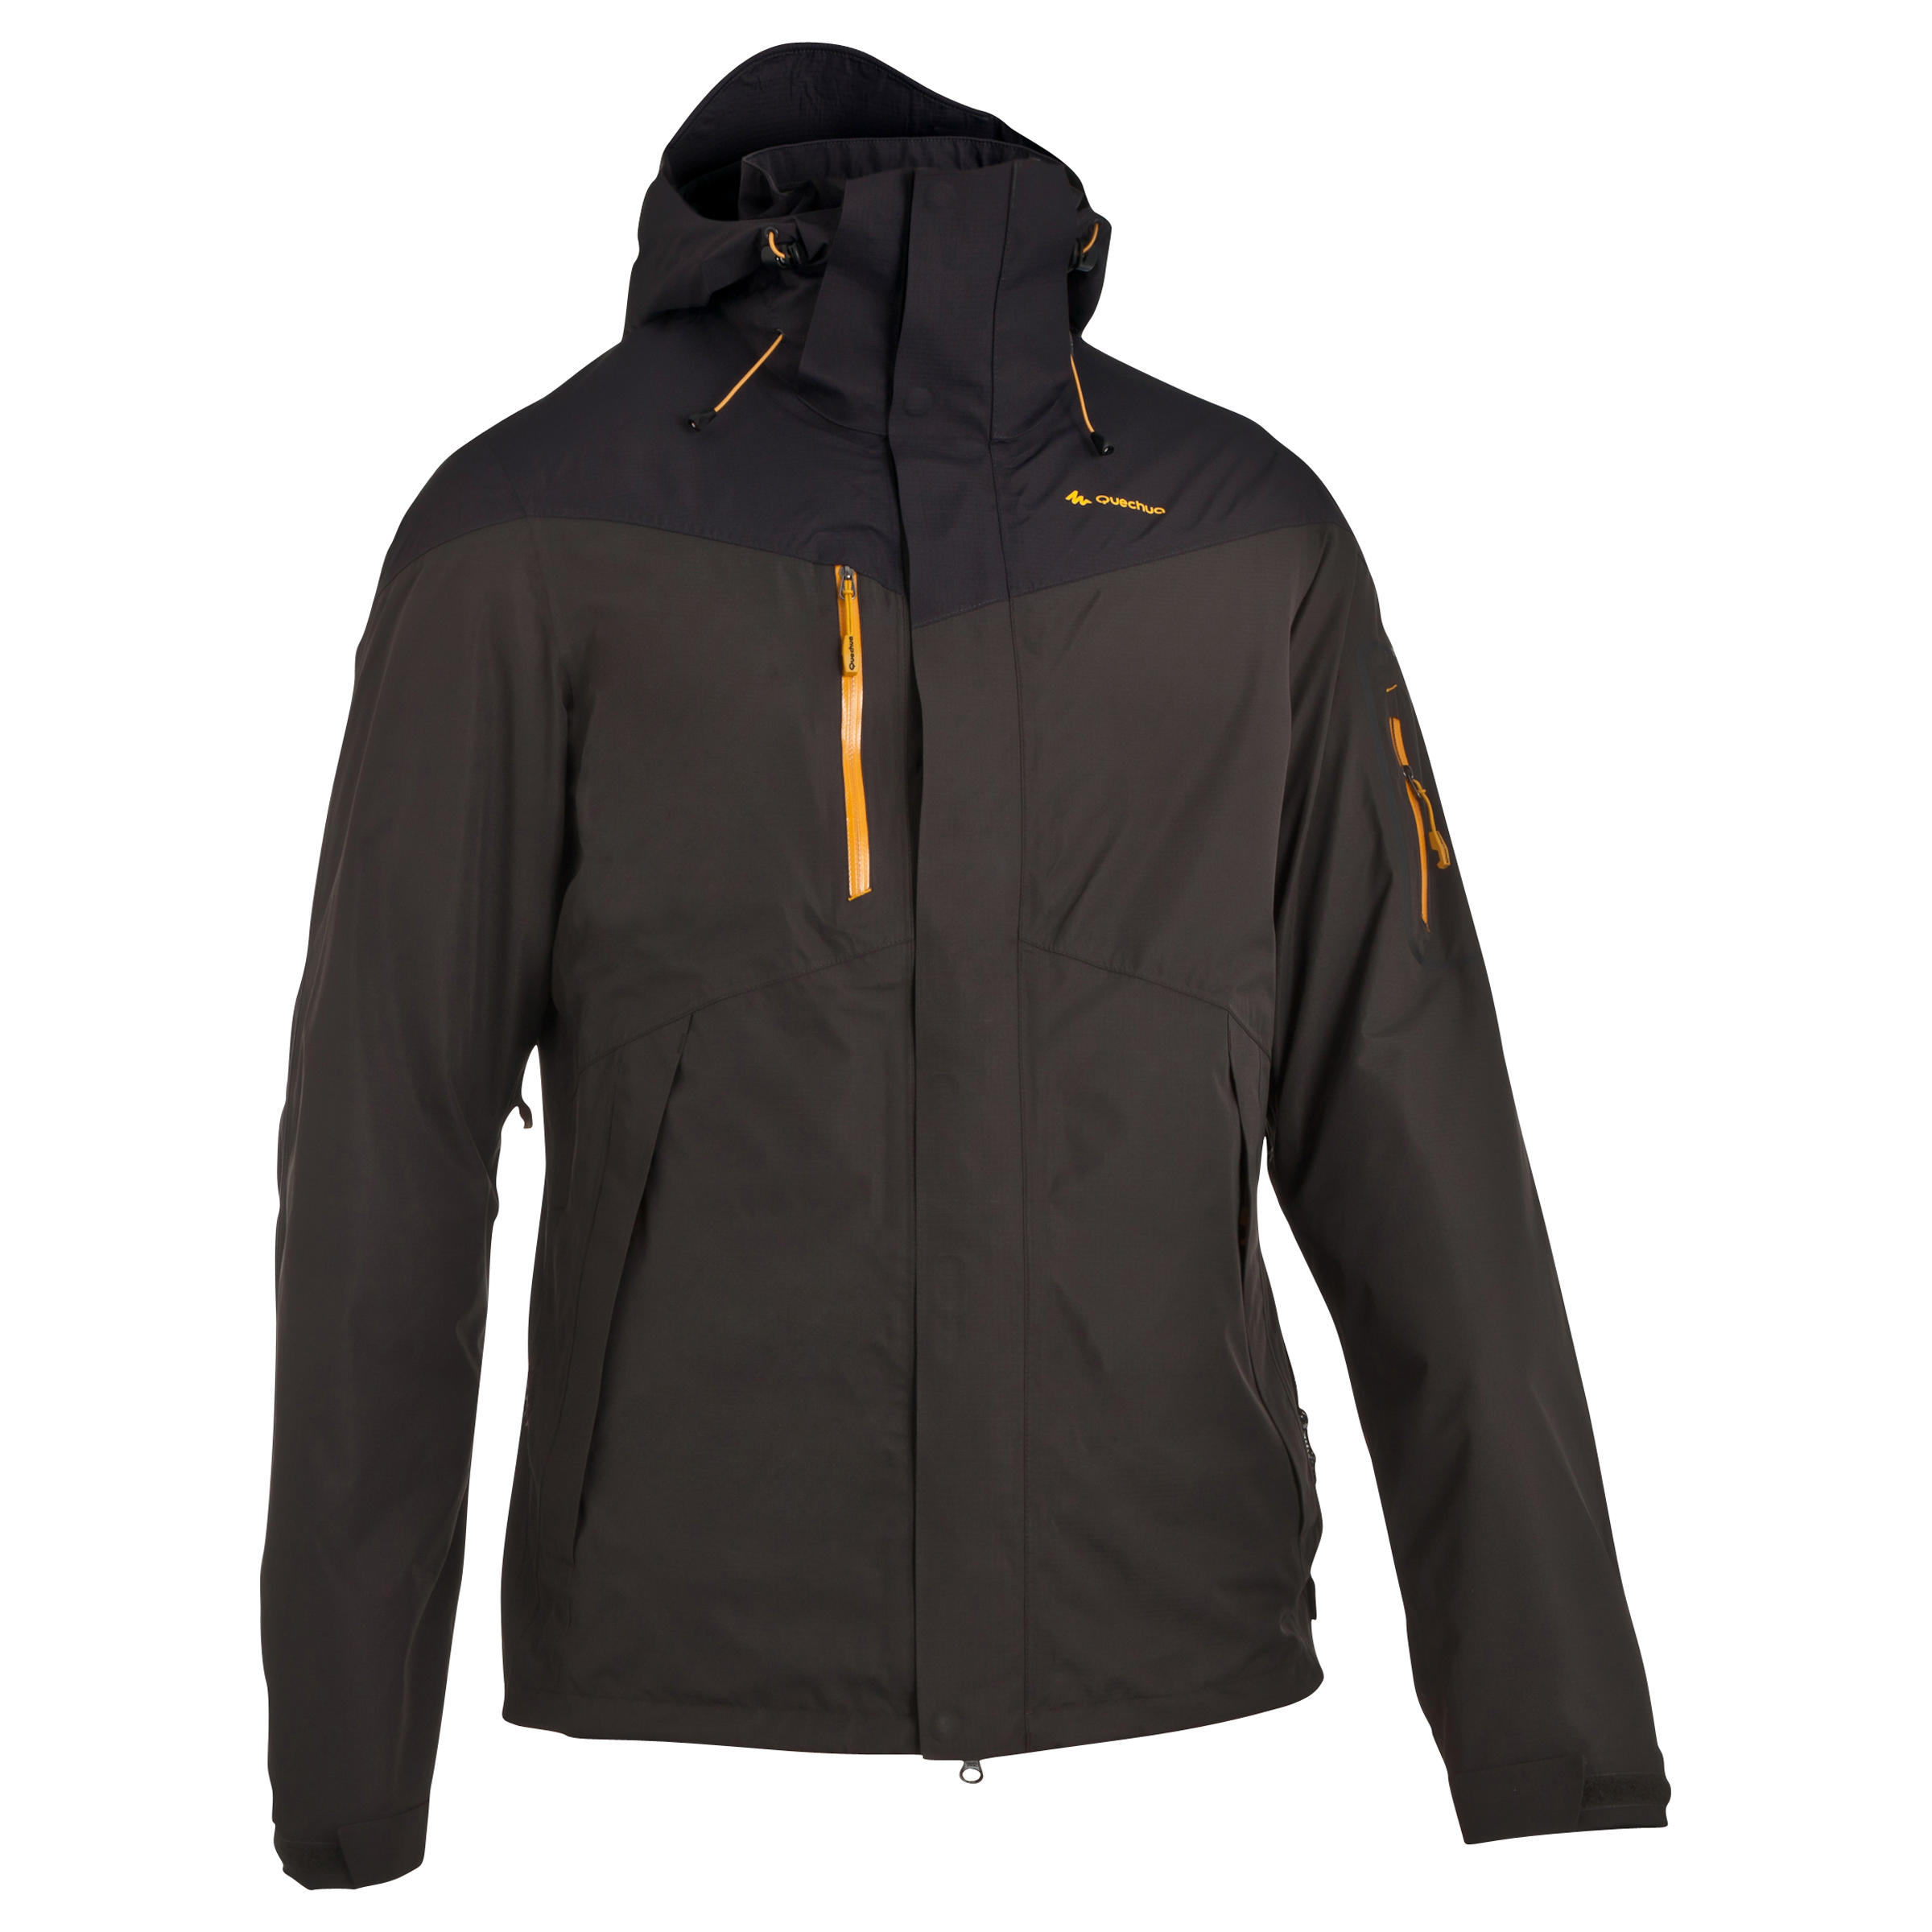 QUECHUA by Decathlon Full Sleeve Solid Men Jacket - Buy QUECHUA by Decathlon  Full Sleeve Solid Men Jacket Online at Best Prices in India | Flipkart.com